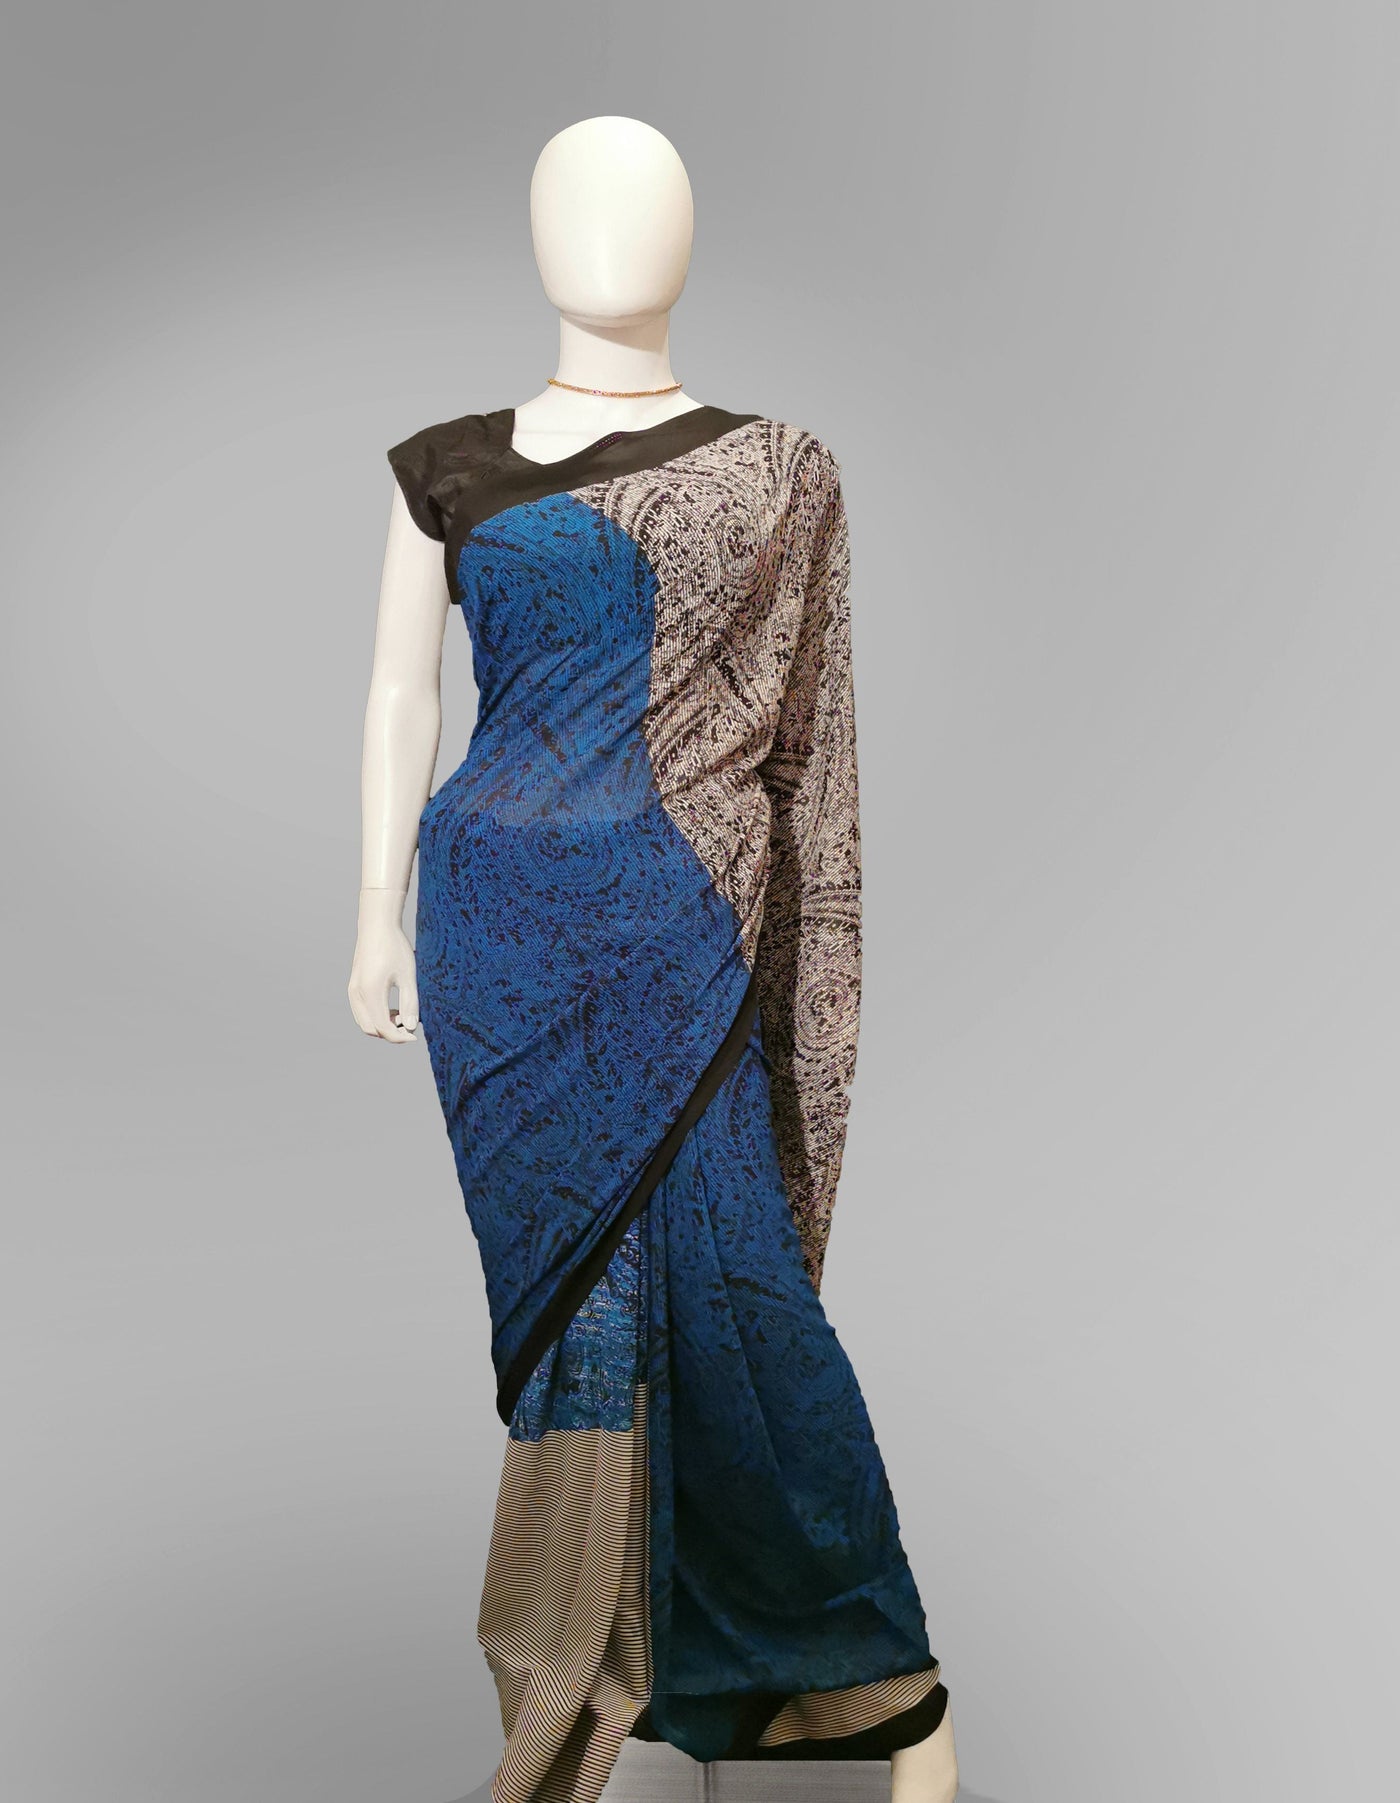 Saree in Blue Black and White with Block Print Work Indian Clothing in Denver, CO, Aurora, CO, Boulder, CO, Fort Collins, CO, Colorado Springs, CO, Parker, CO, Highlands Ranch, CO, Cherry Creek, CO, Centennial, CO, and Longmont, CO. NATIONWIDE SHIPPING USA- India Fashion X